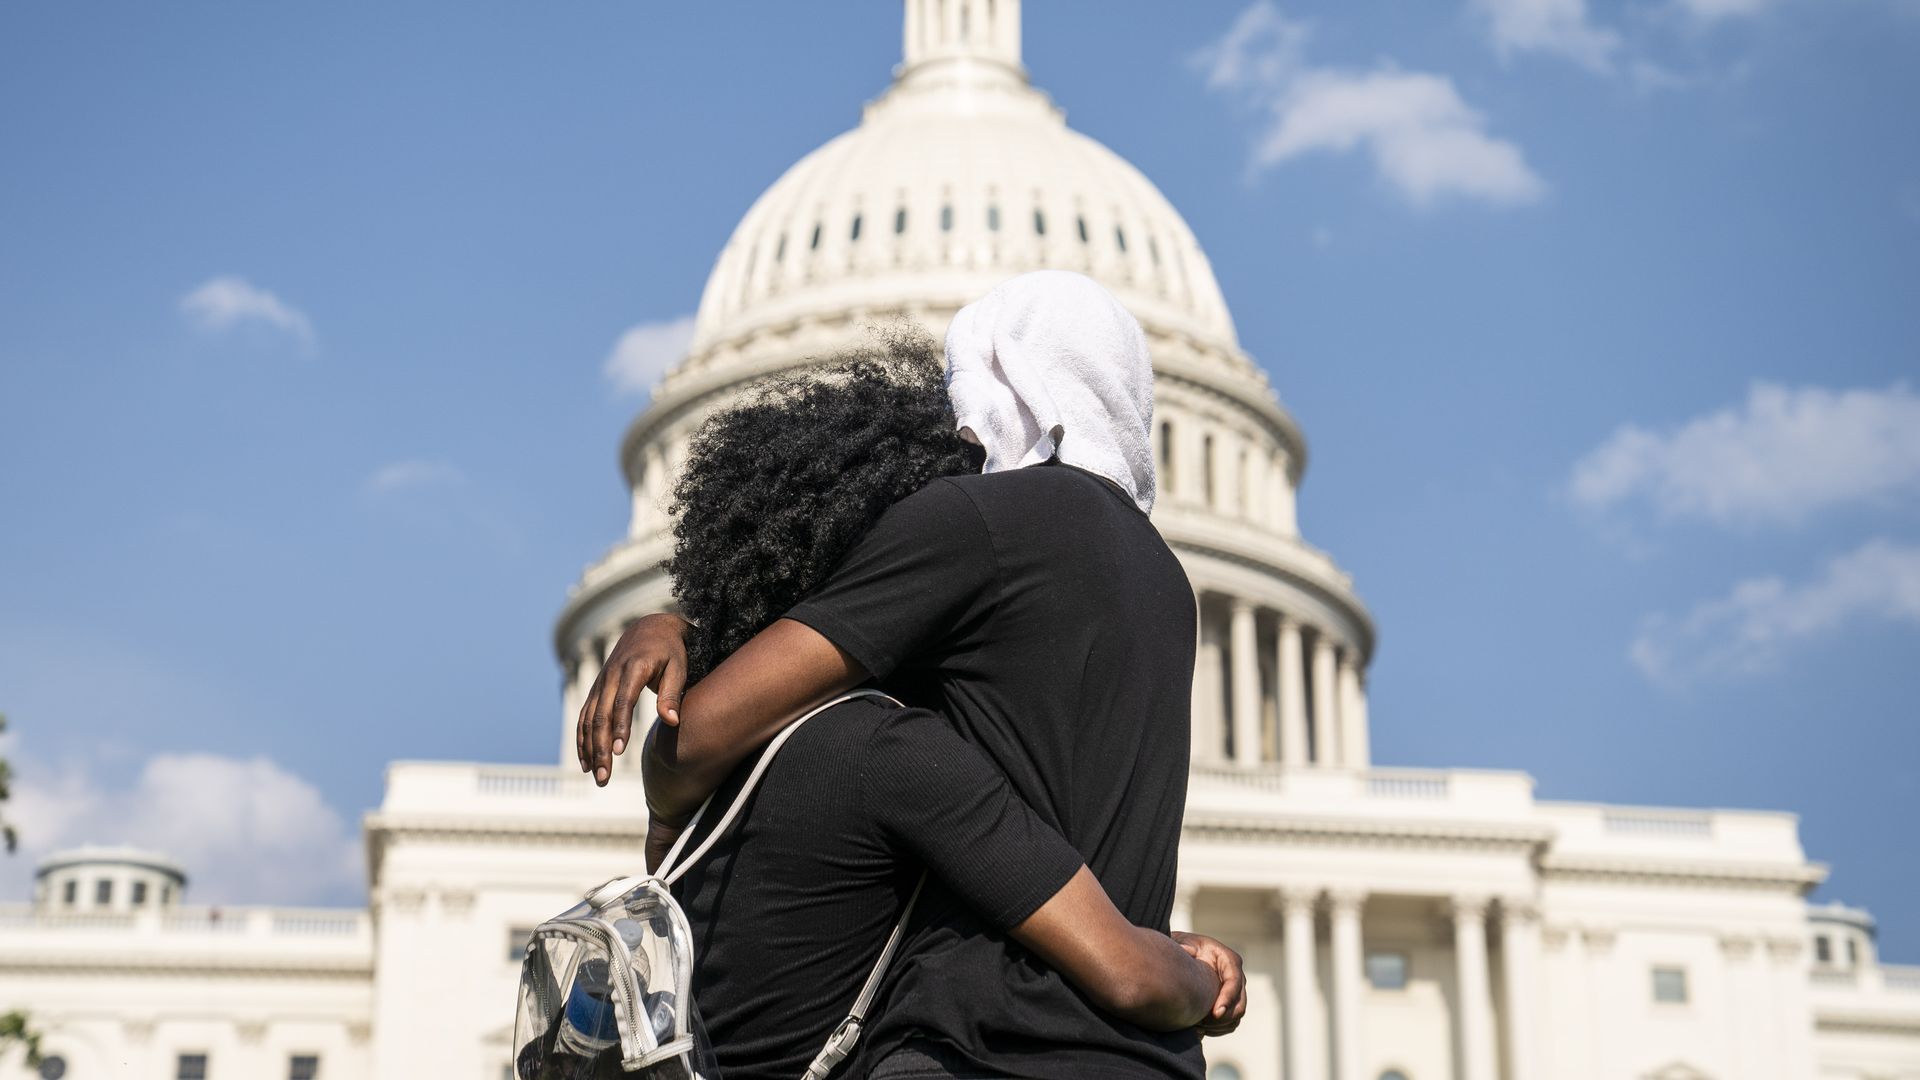 Protestors in front of the Capitol building. Photo: Sarah Silbiger/Getty Images